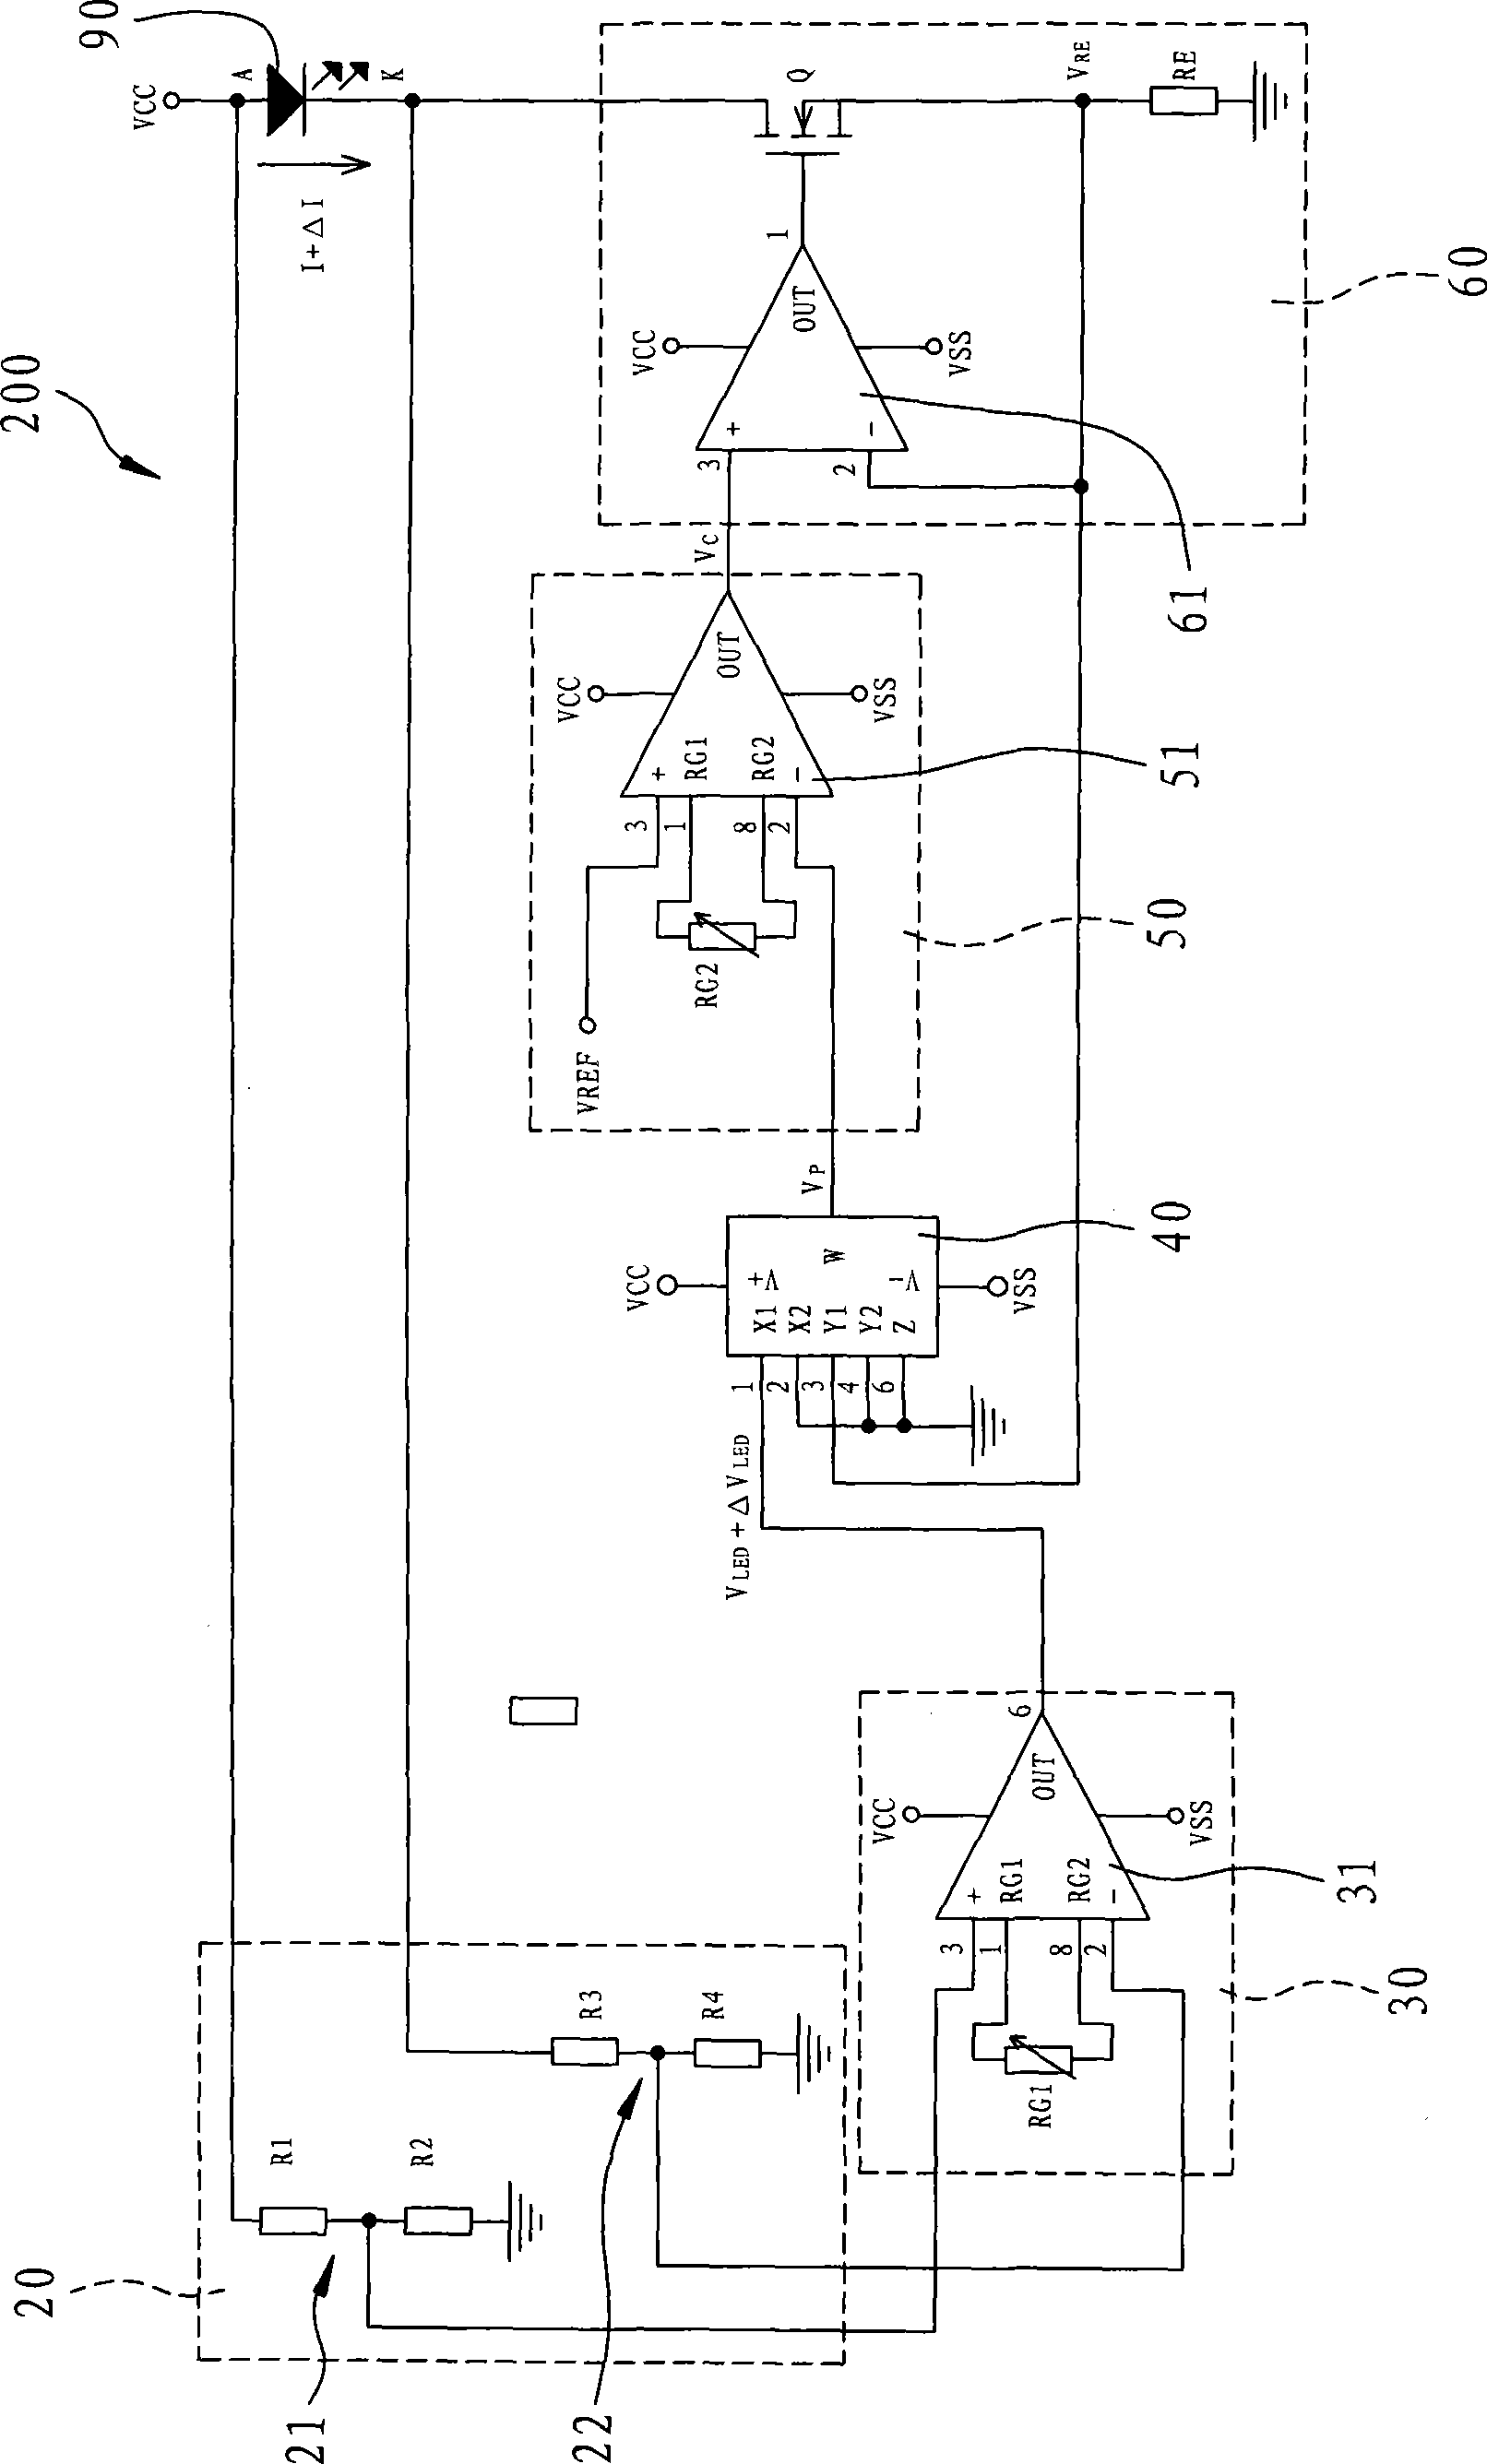 Feedback type automatic power control system